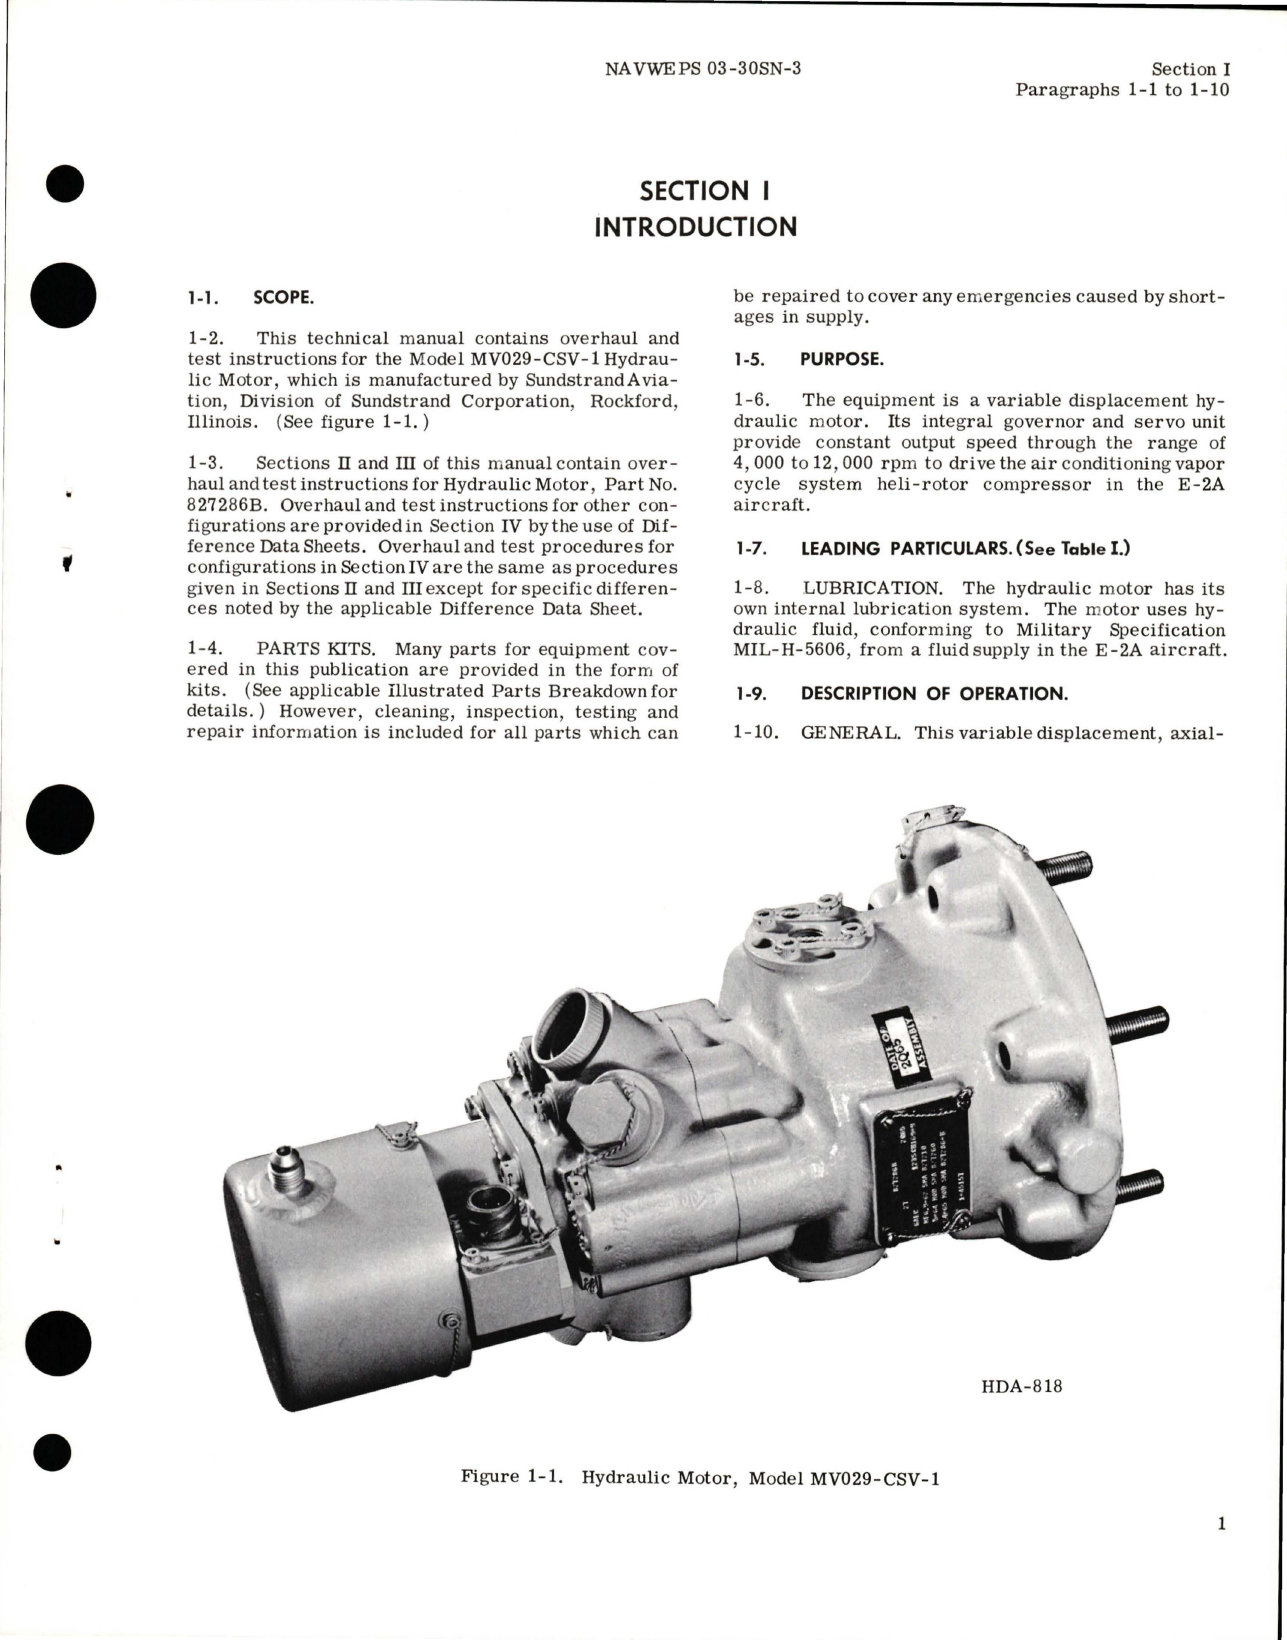 Sample page 5 from AirCorps Library document: Overhaul Instructions for Hydraulic Motor - Model MV029-CSV-1 - Part 827286B